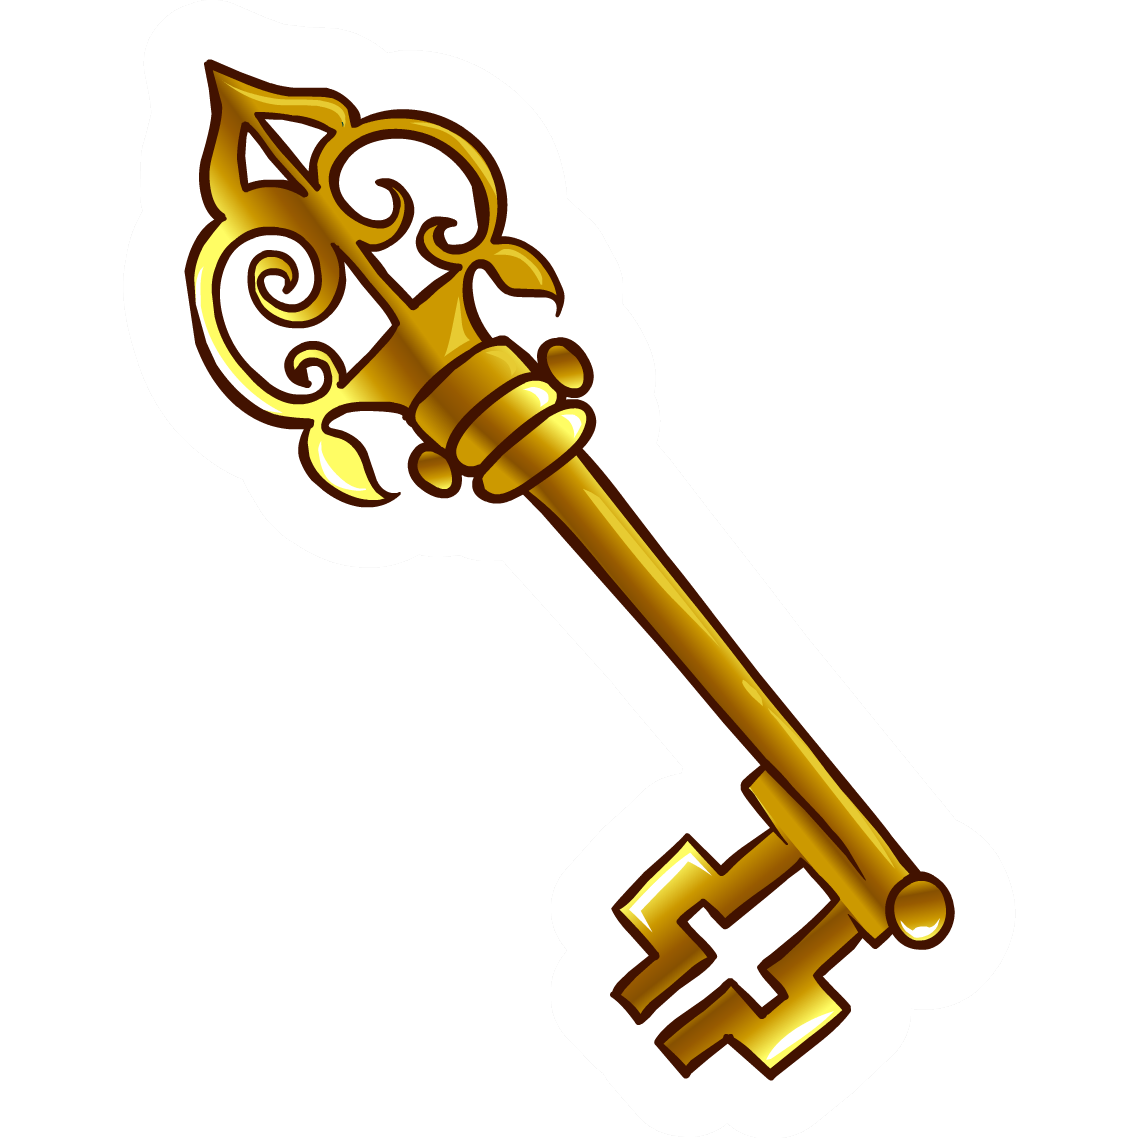 Skeleton Key Cliparts - The Cliparts